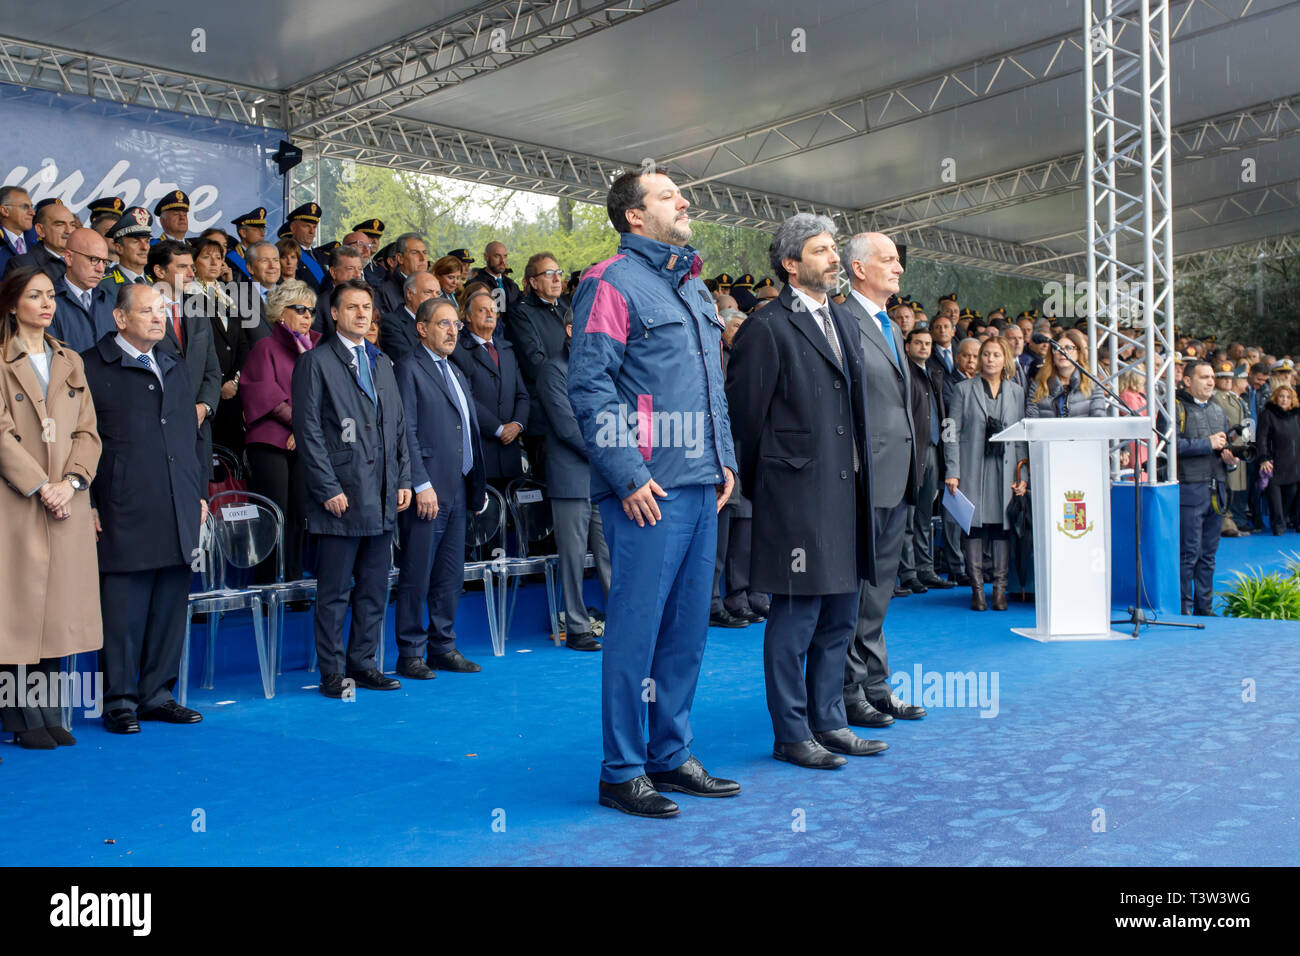 Rome, Italy - April 10, 2019: Interior Minister Matteo Salvini (left) with the president of the Chamber of Deputies Roberto Fico (center) and the poli Stock Photo